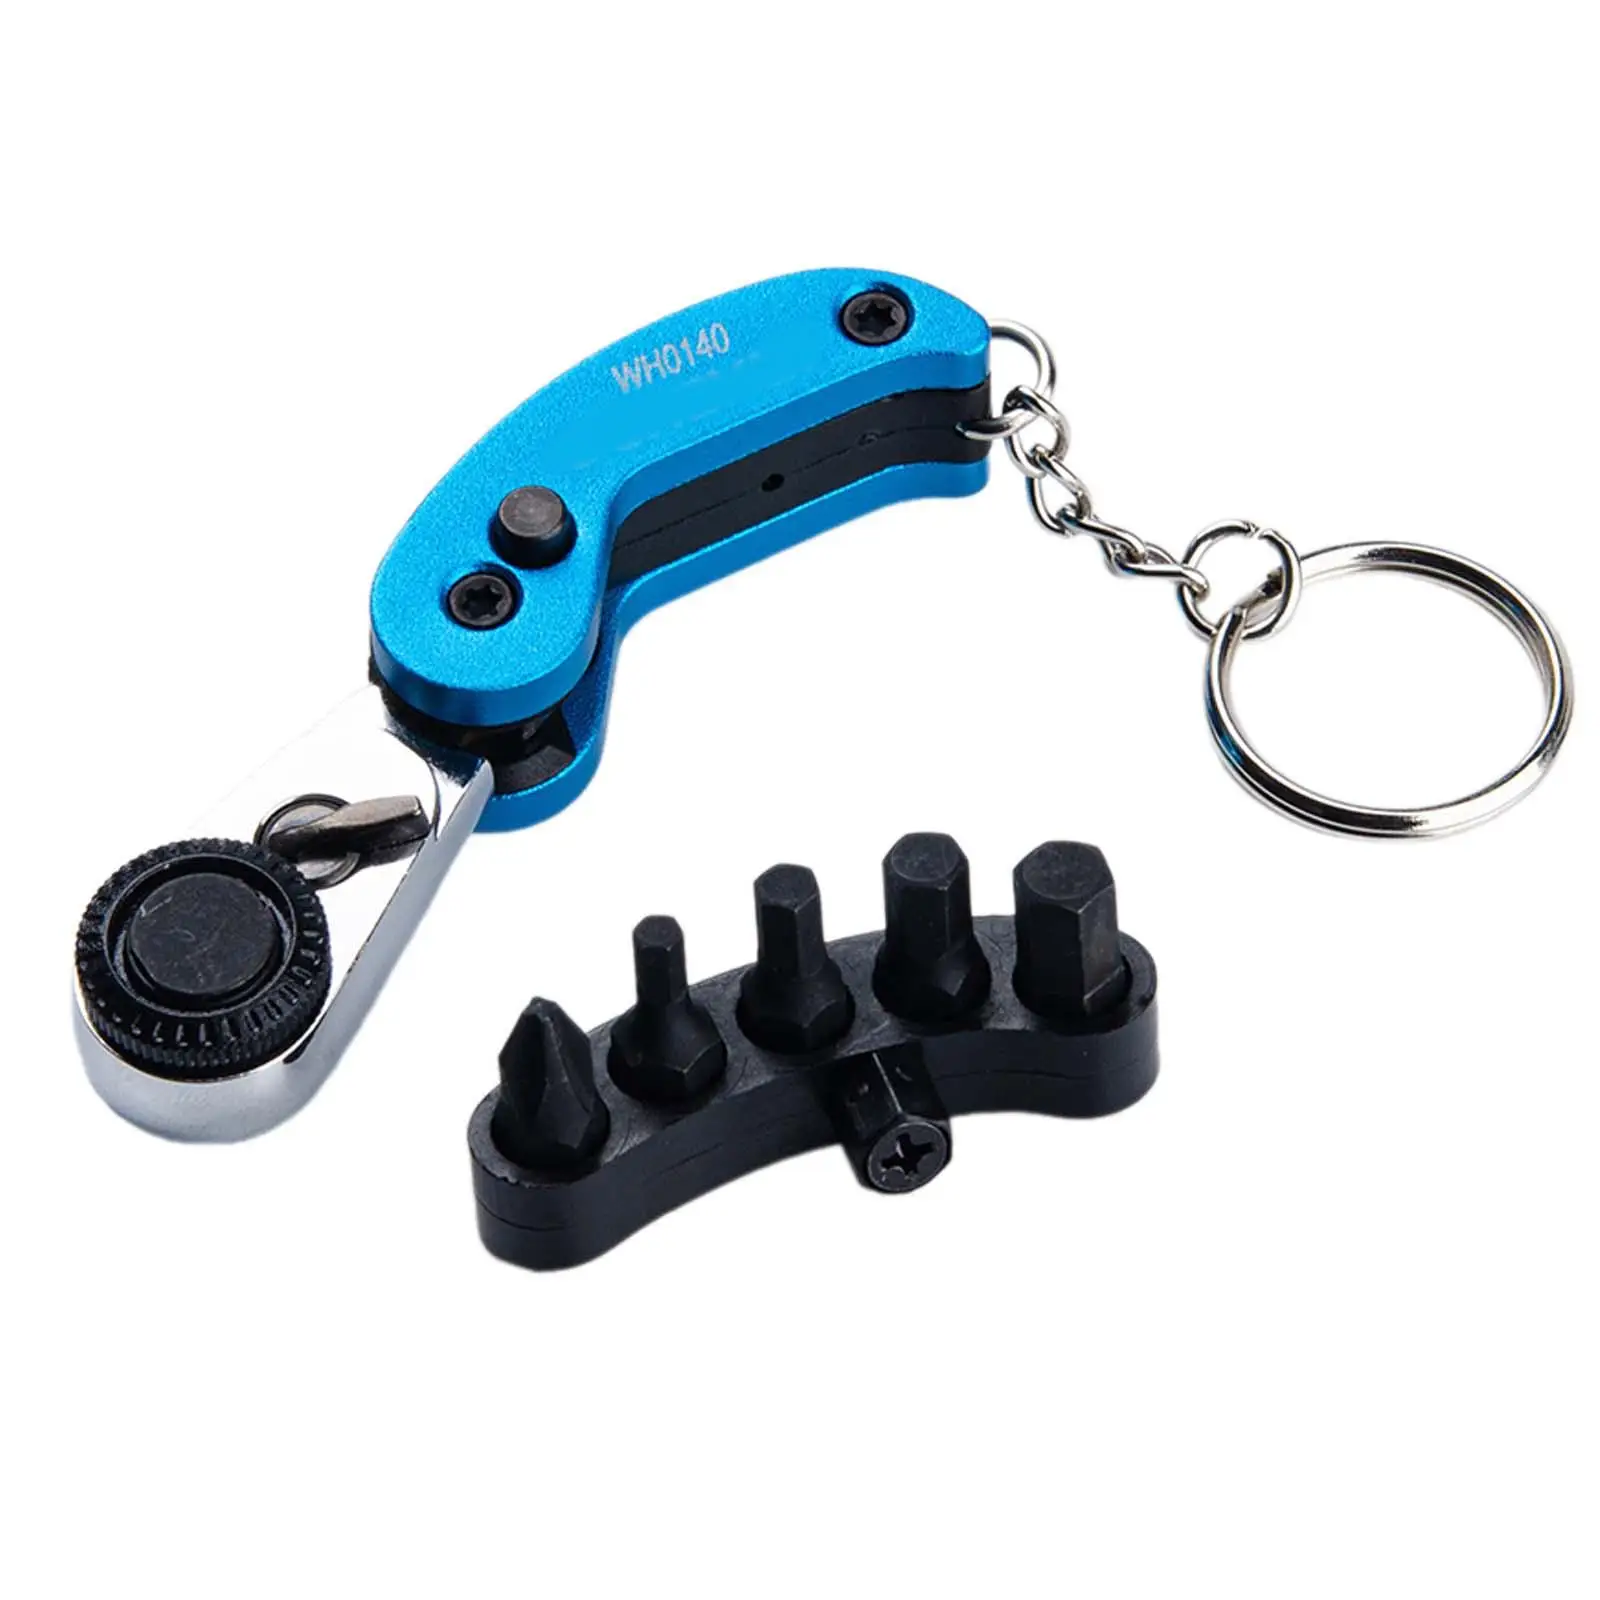 Micro Ratchet Wrench Set Portable Compact Tool for Appliance Repair Home Use